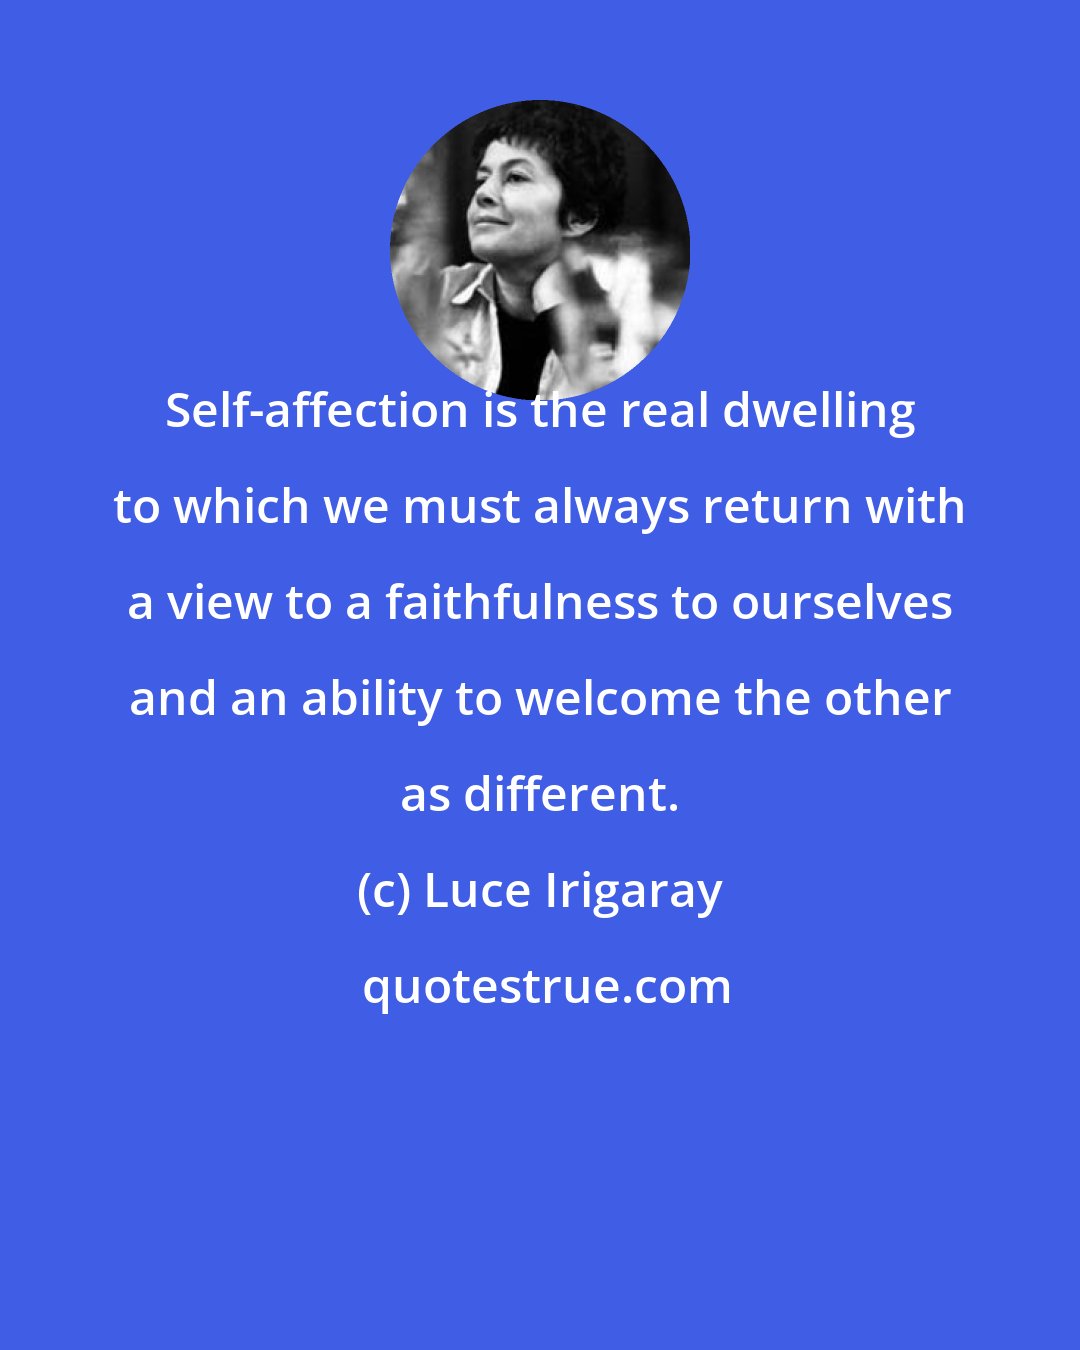 Luce Irigaray: Self-affection is the real dwelling to which we must always return with a view to a faithfulness to ourselves and an ability to welcome the other as different.